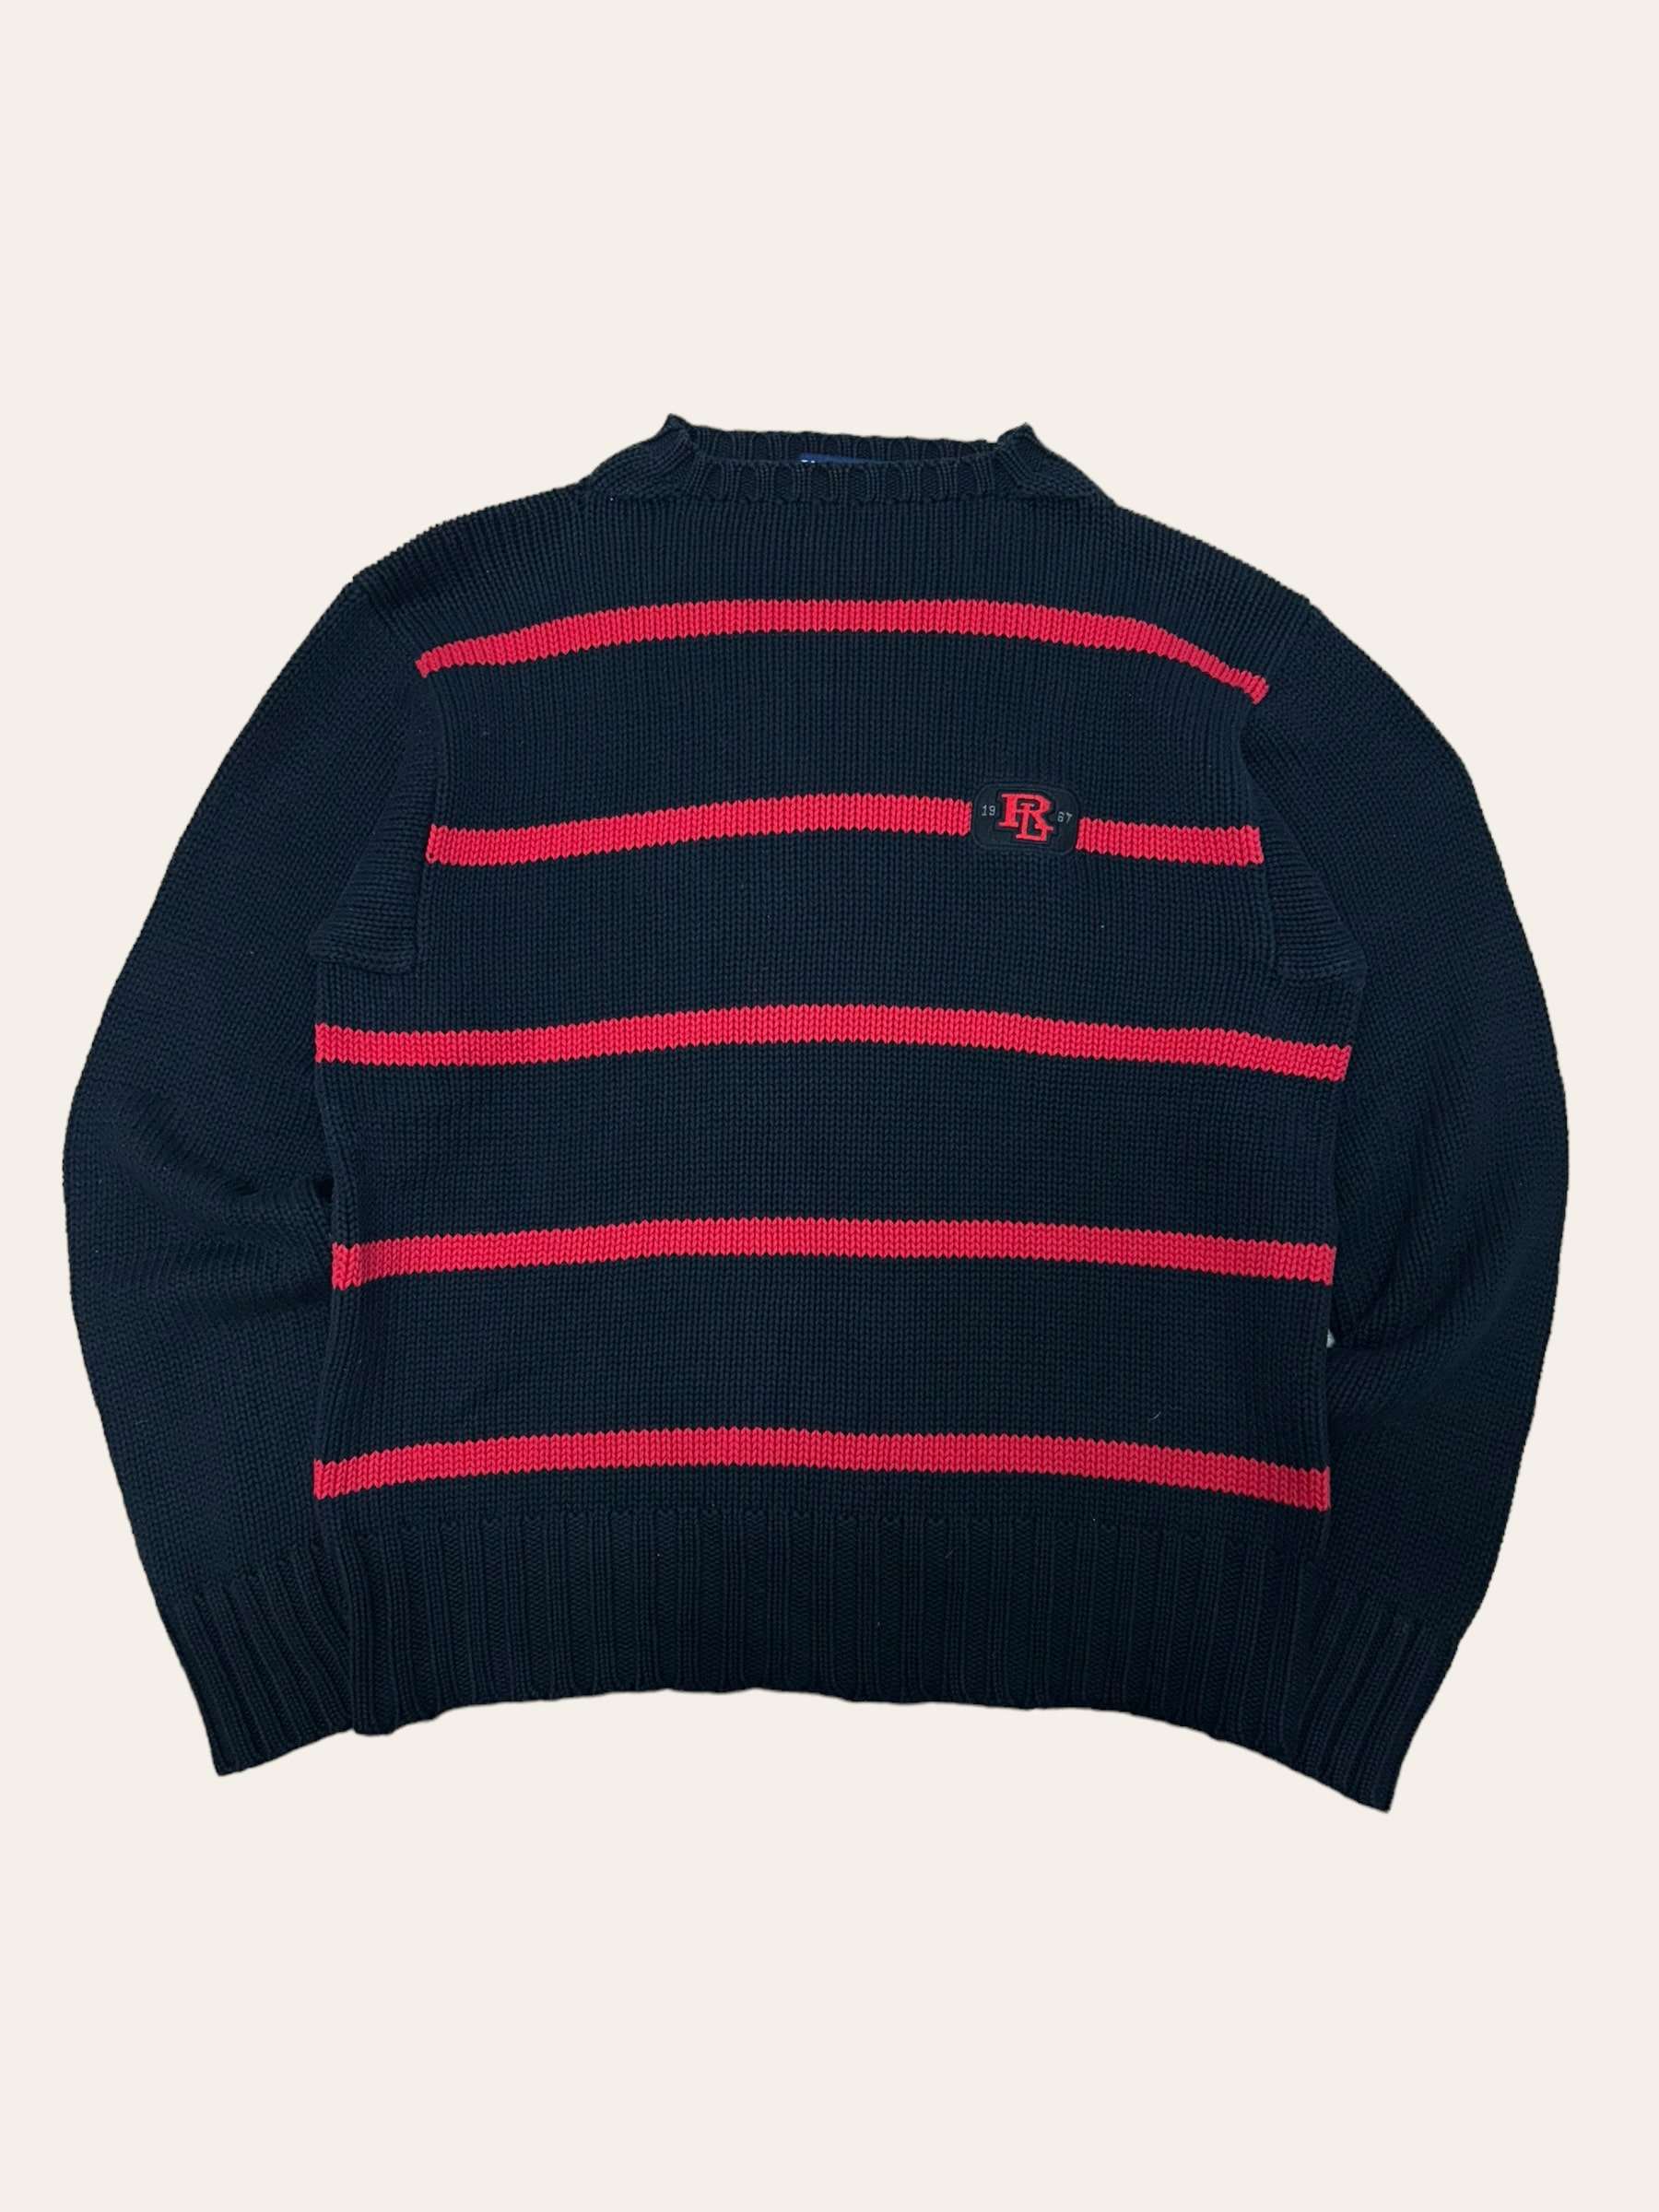 POLO SPORT 90&#039;s black/red stripe RL patched cotton sweater 100